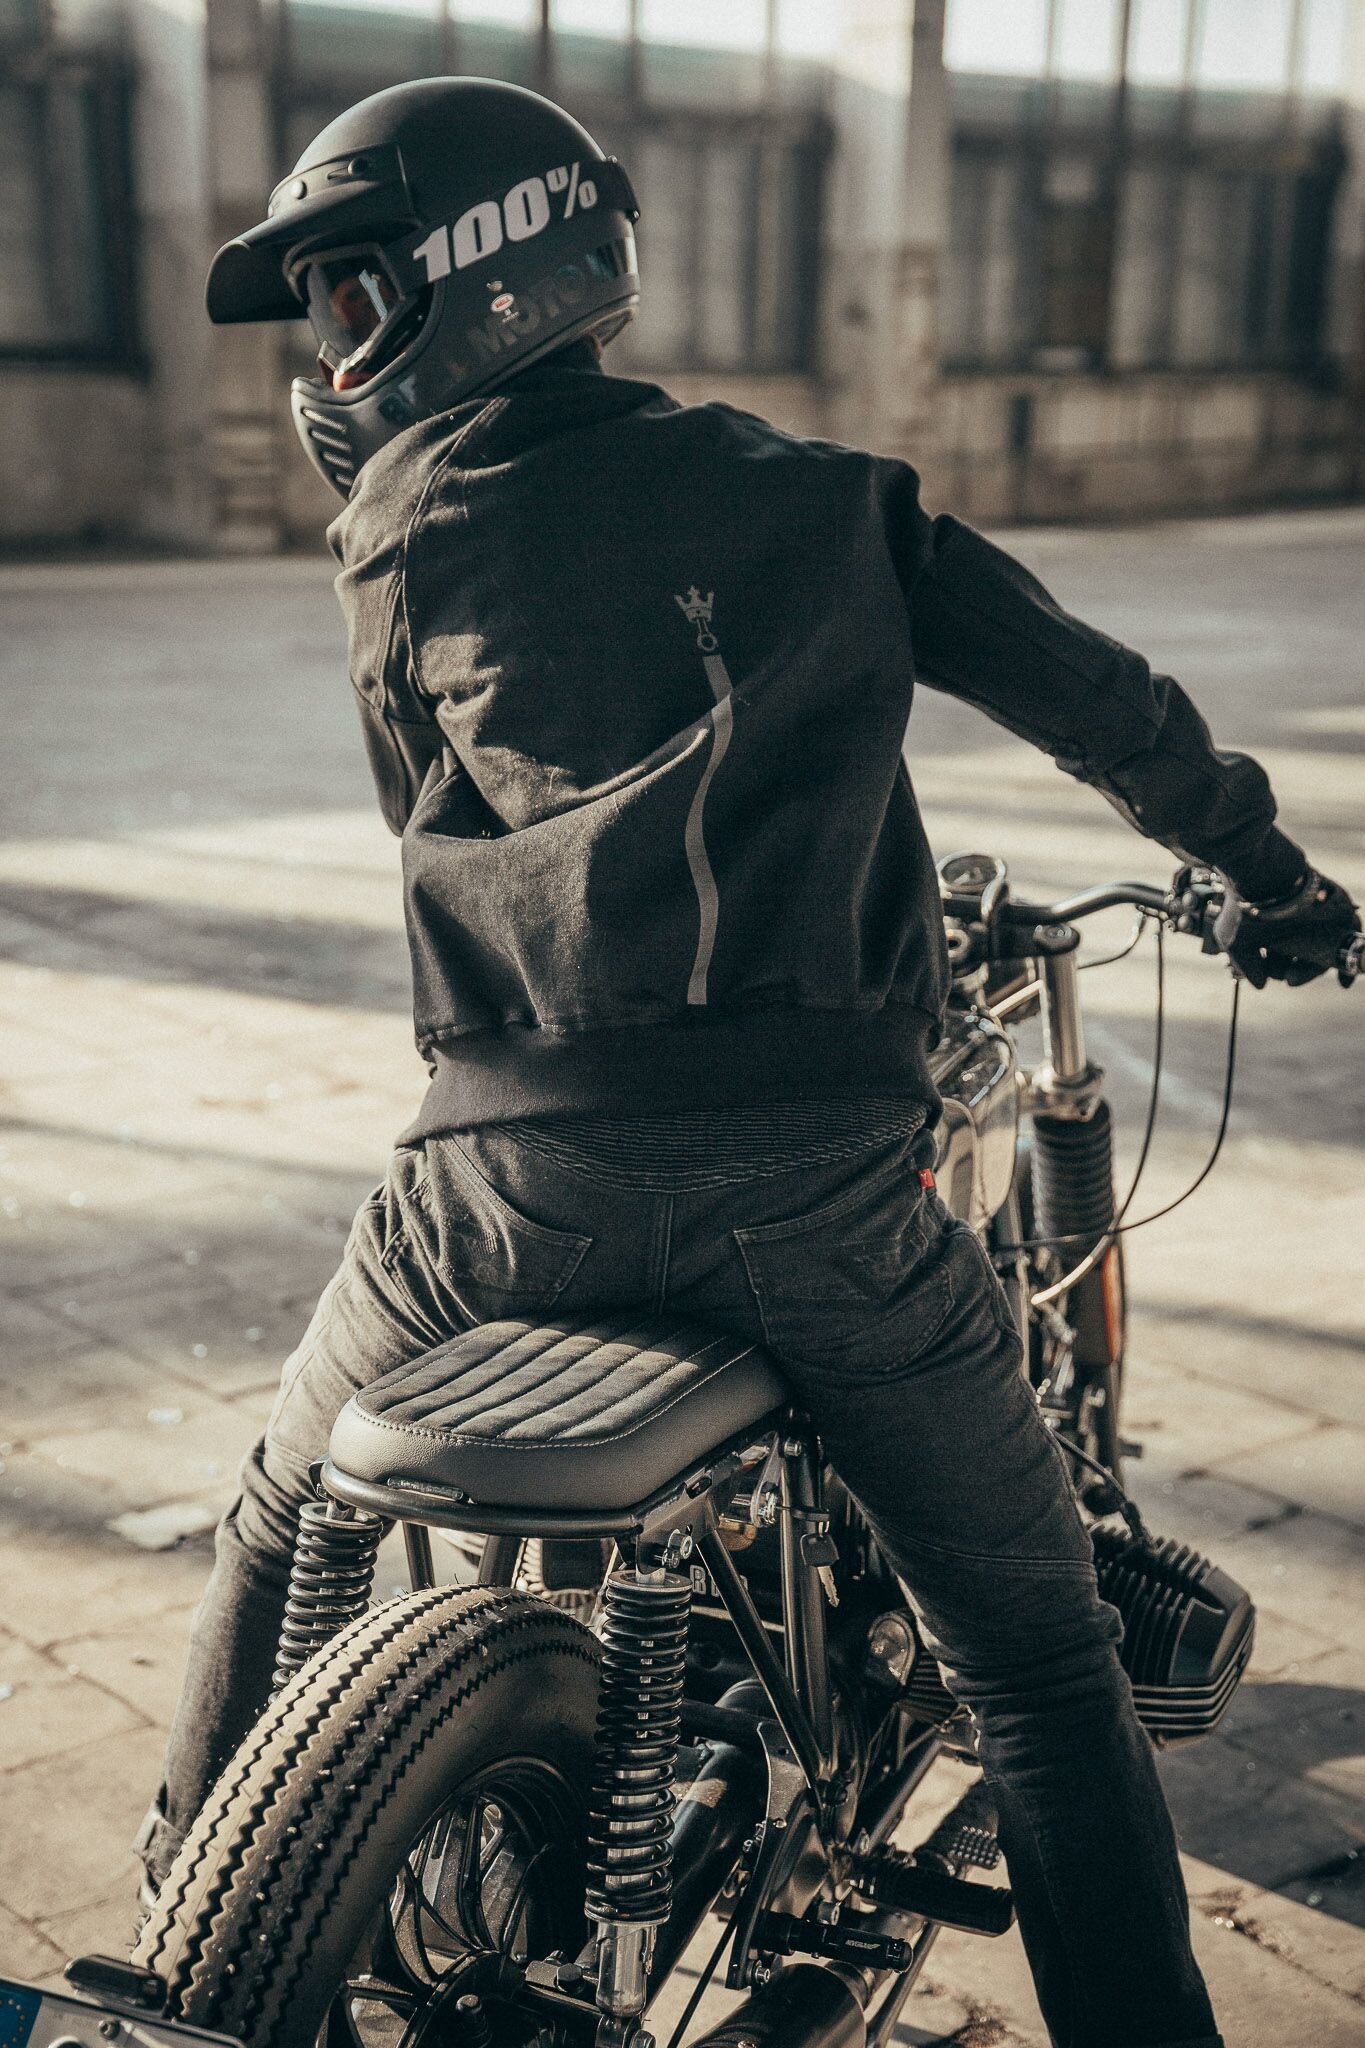 4 Best Motorcycle Jeans To Keep You Safe And Look Stylish - My Car Heaven